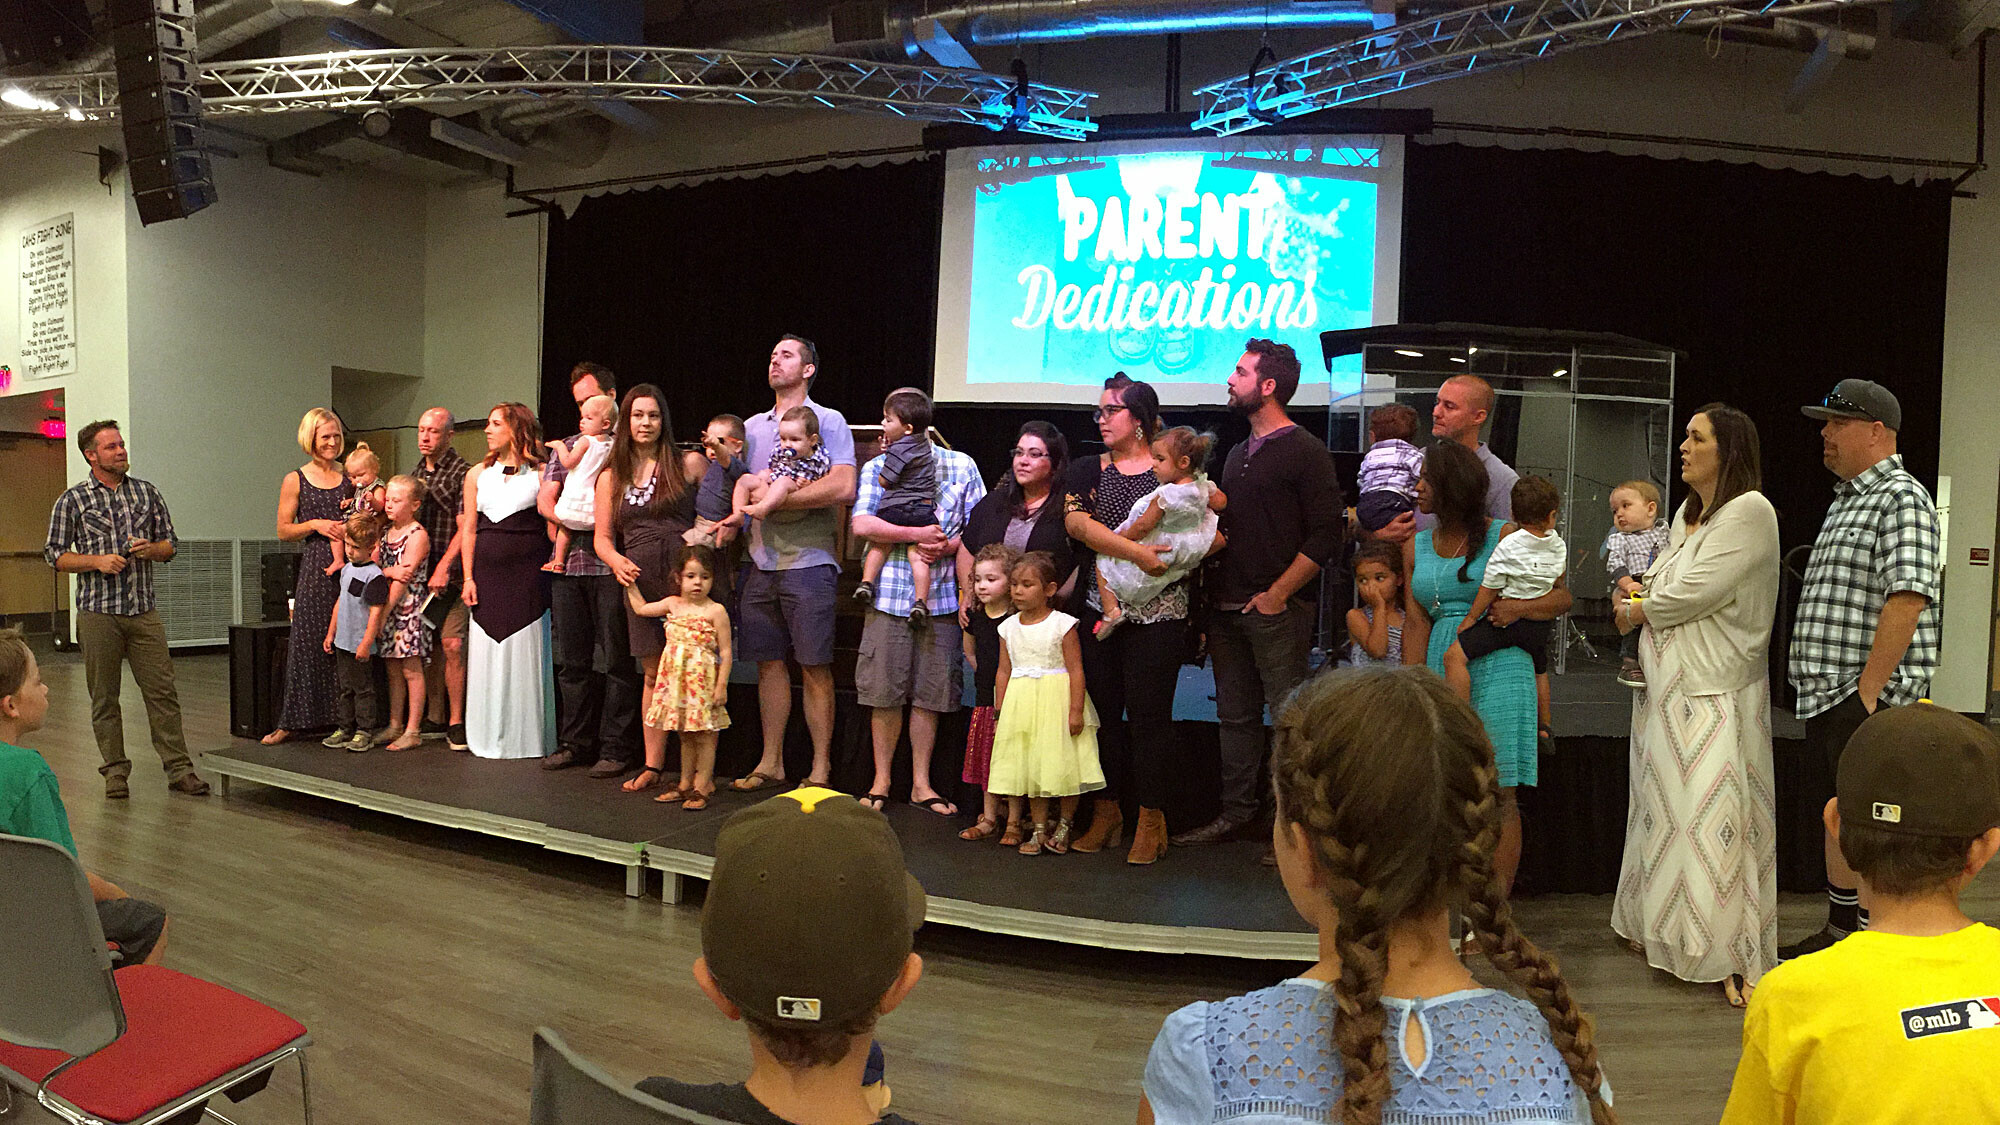 Parent Dedications at Life Mission Church in Escondido.